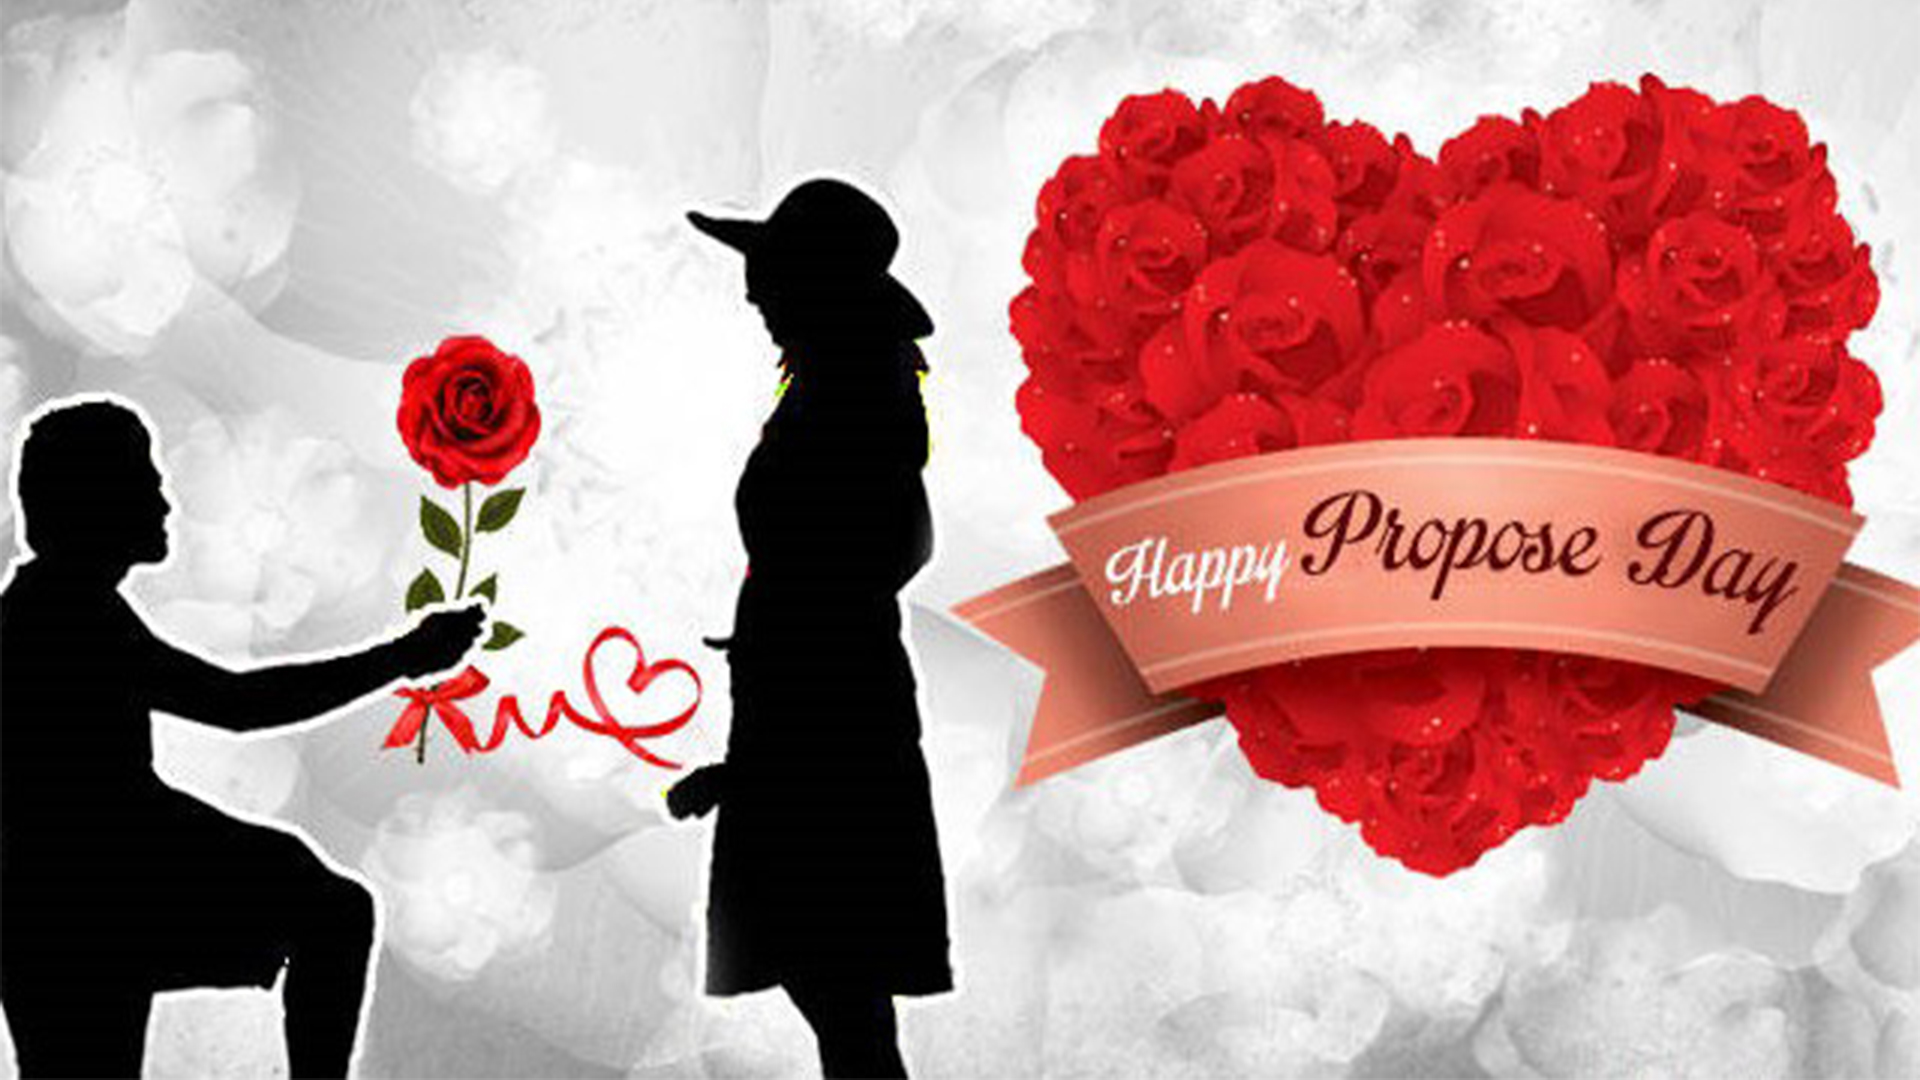 image for propose day